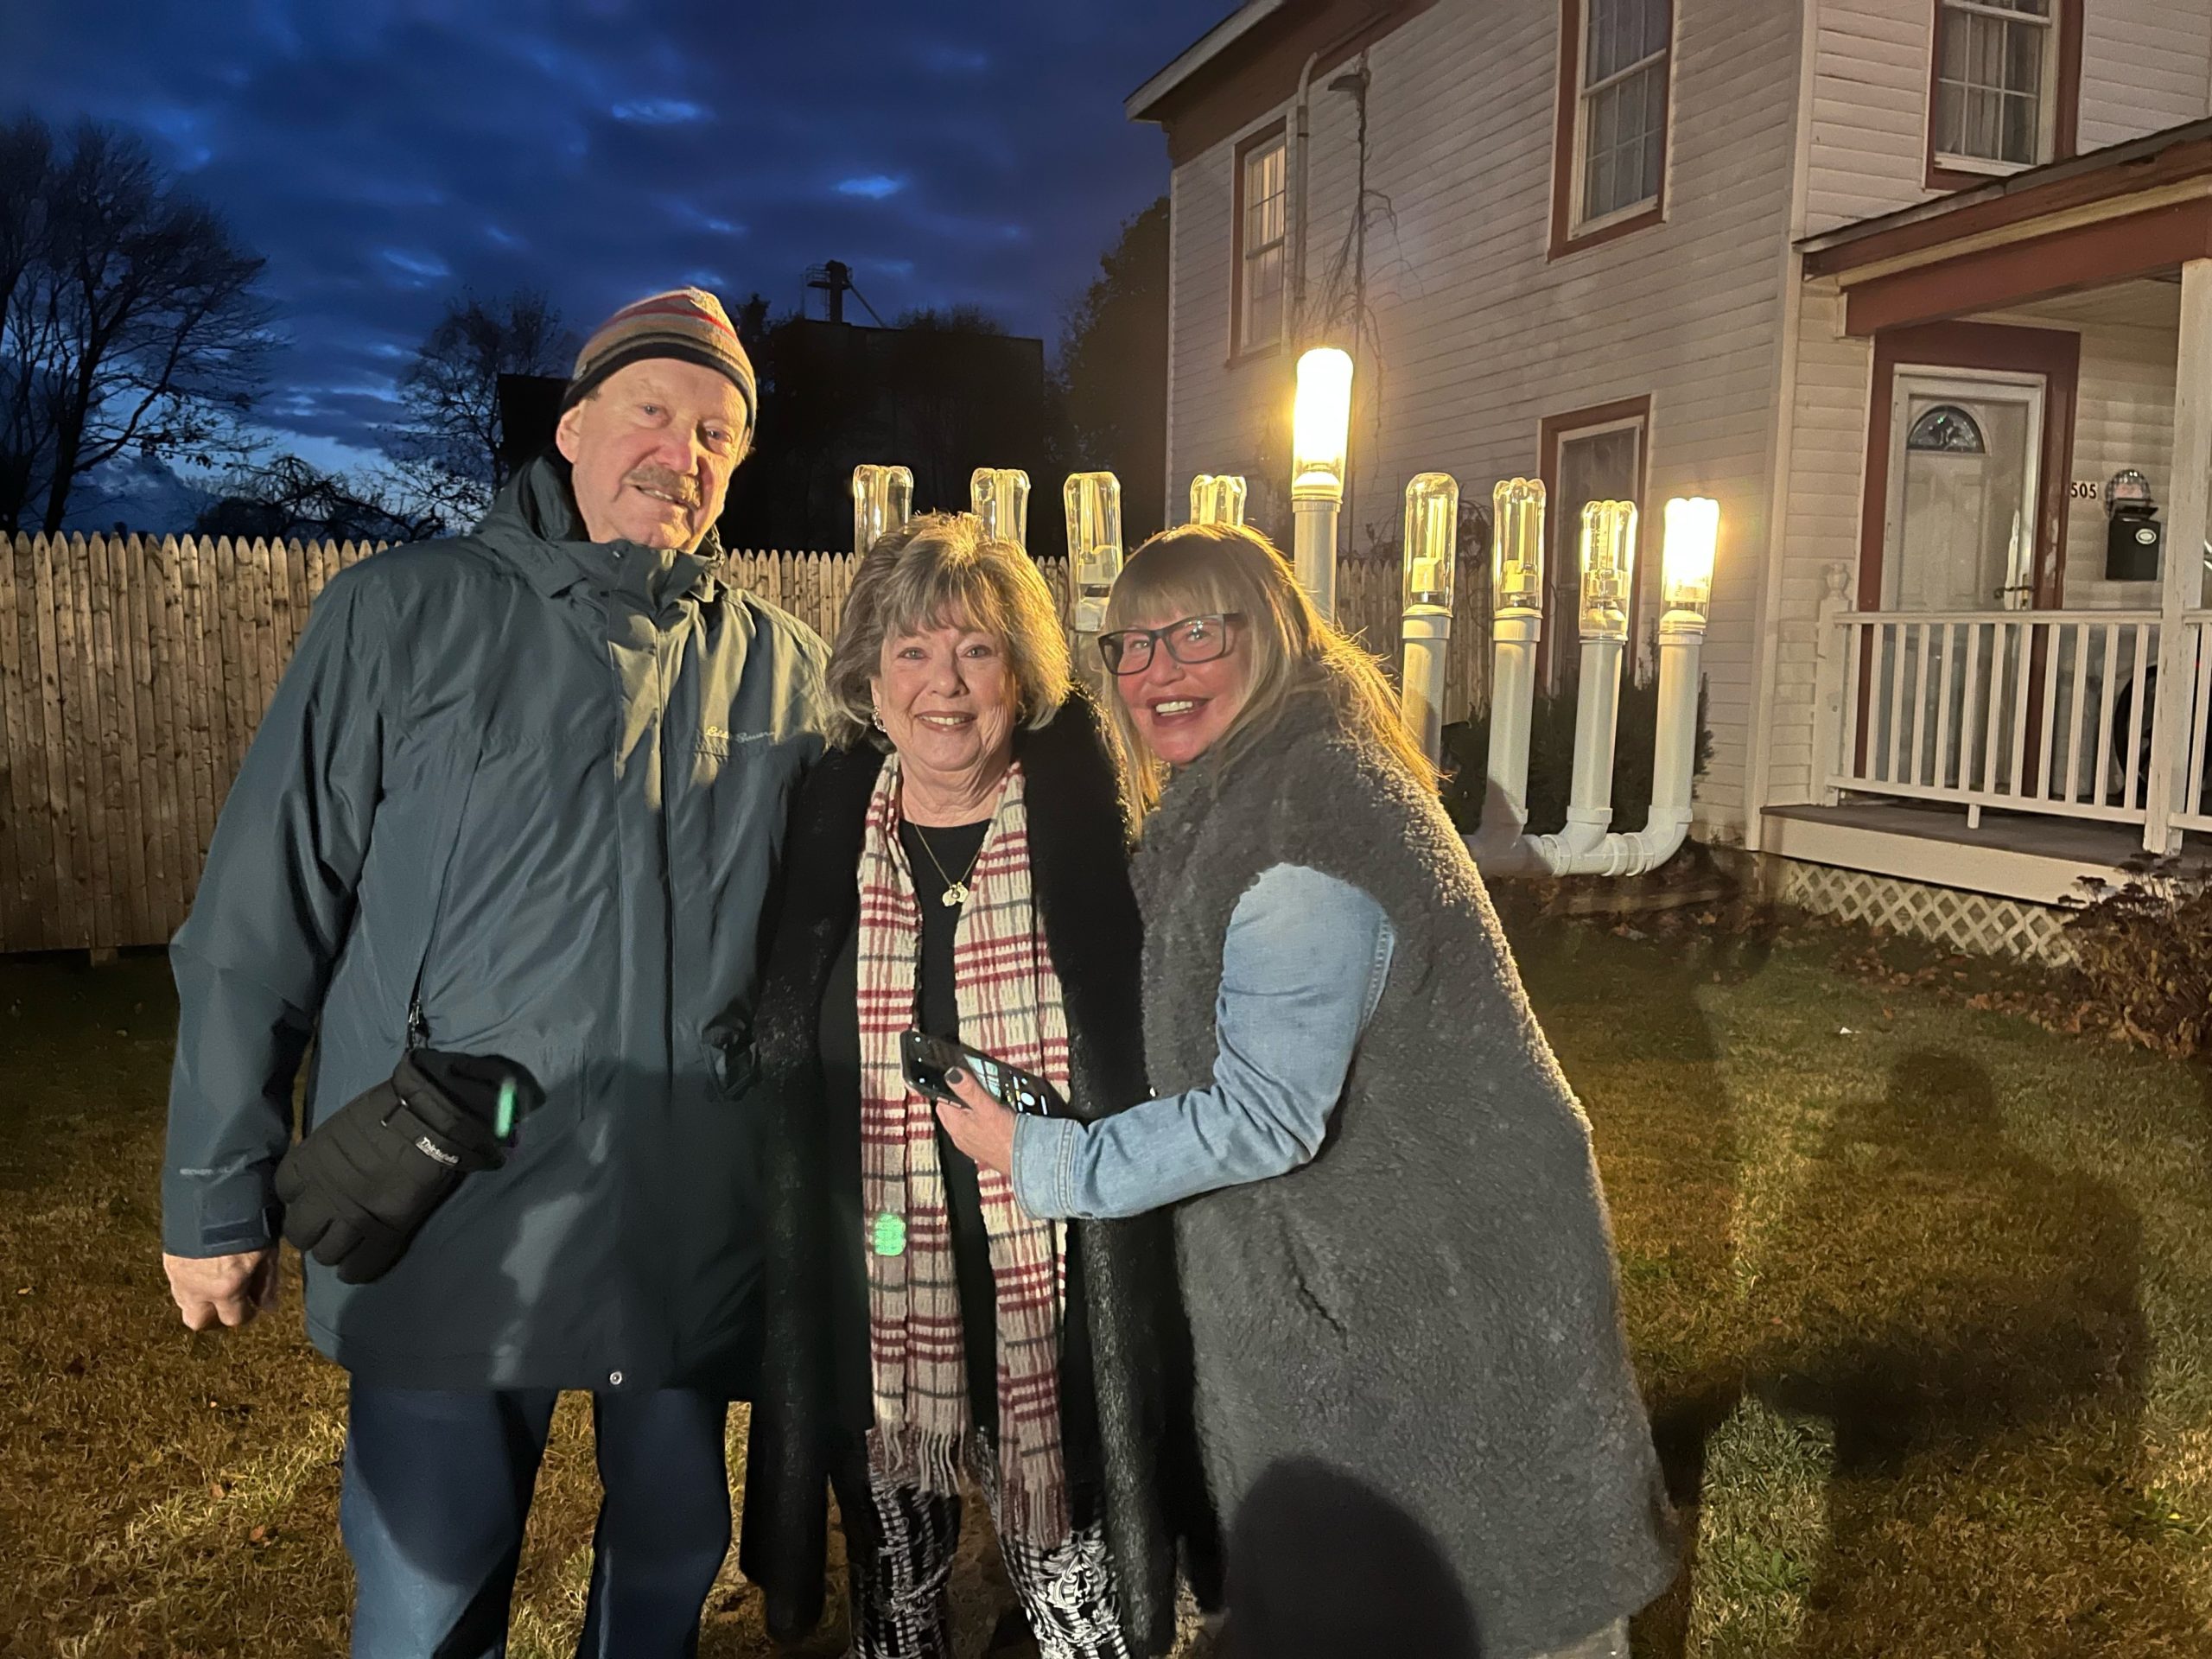 The Eastport Chamber of Commerce held its very first menorah lighting on November 28. The menorah was handmade by David and Marlene Sharinn, who were at the lighting with their daughter Ilene. A public lighting will take place on December 4.